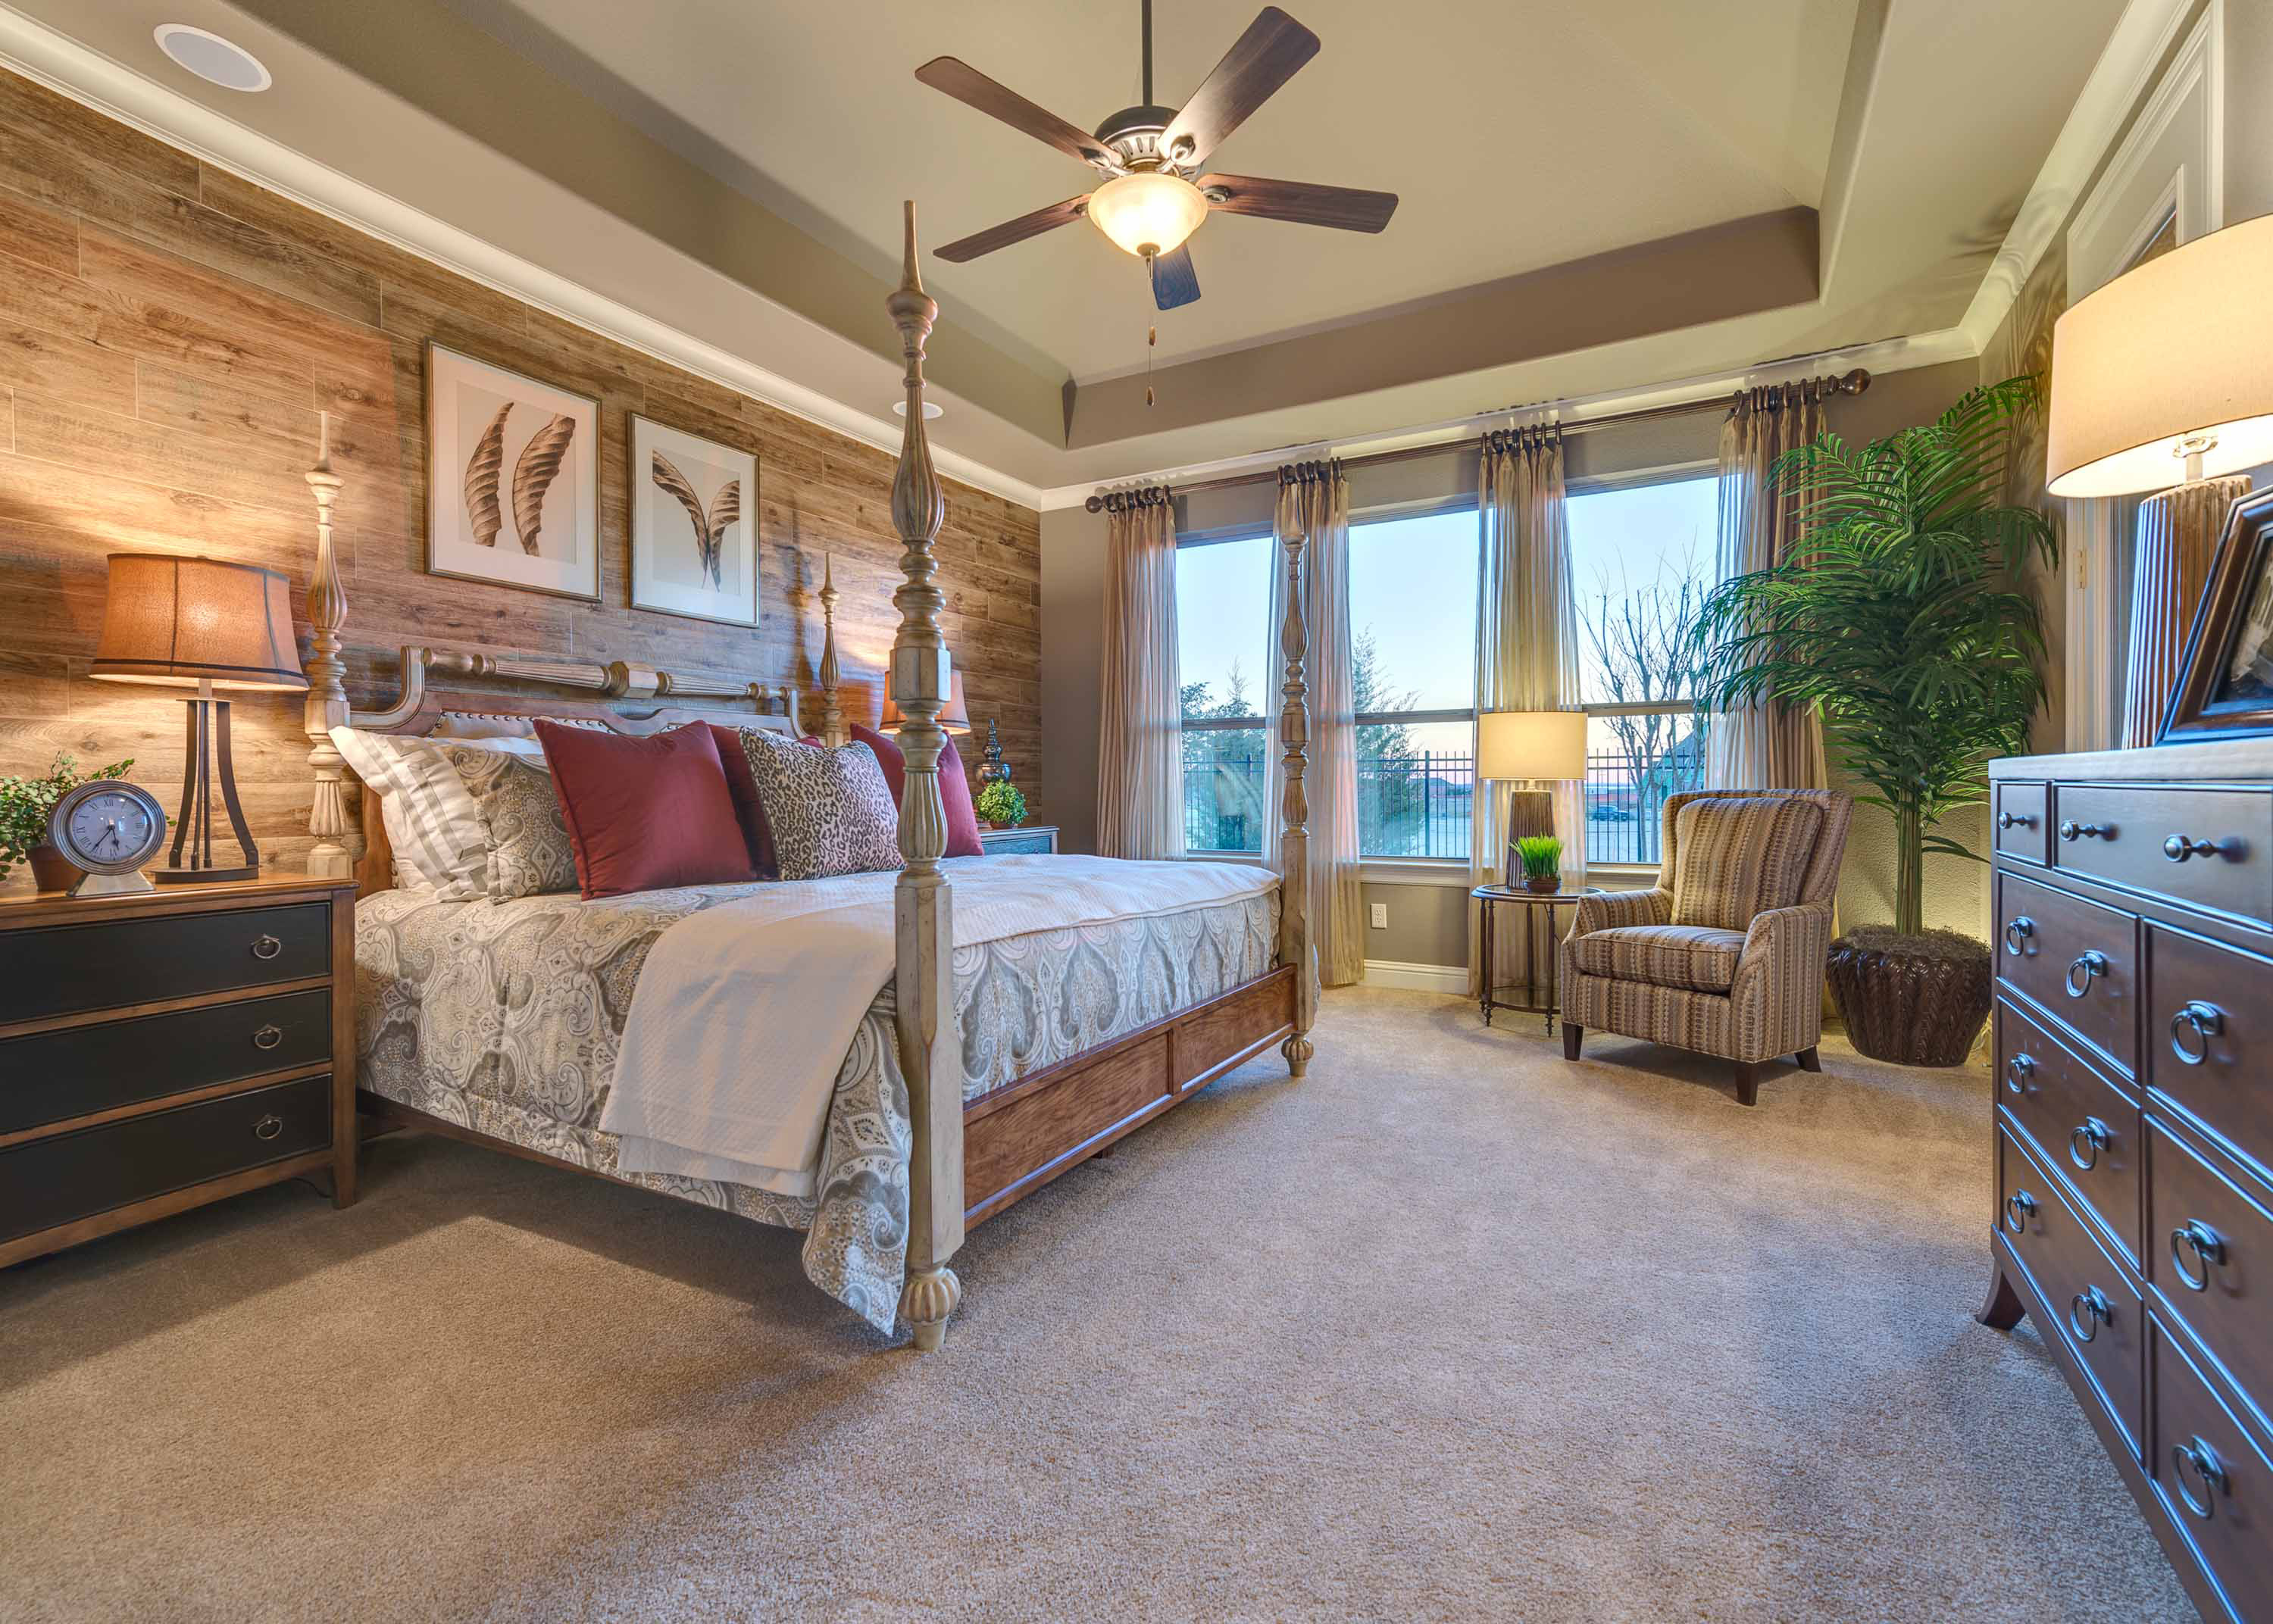 Priced from the $500,000s, Bridges at Las Colinas will feature Darling Homes floor plans that stretch from approximately 2,500 to 4,500 square feet.